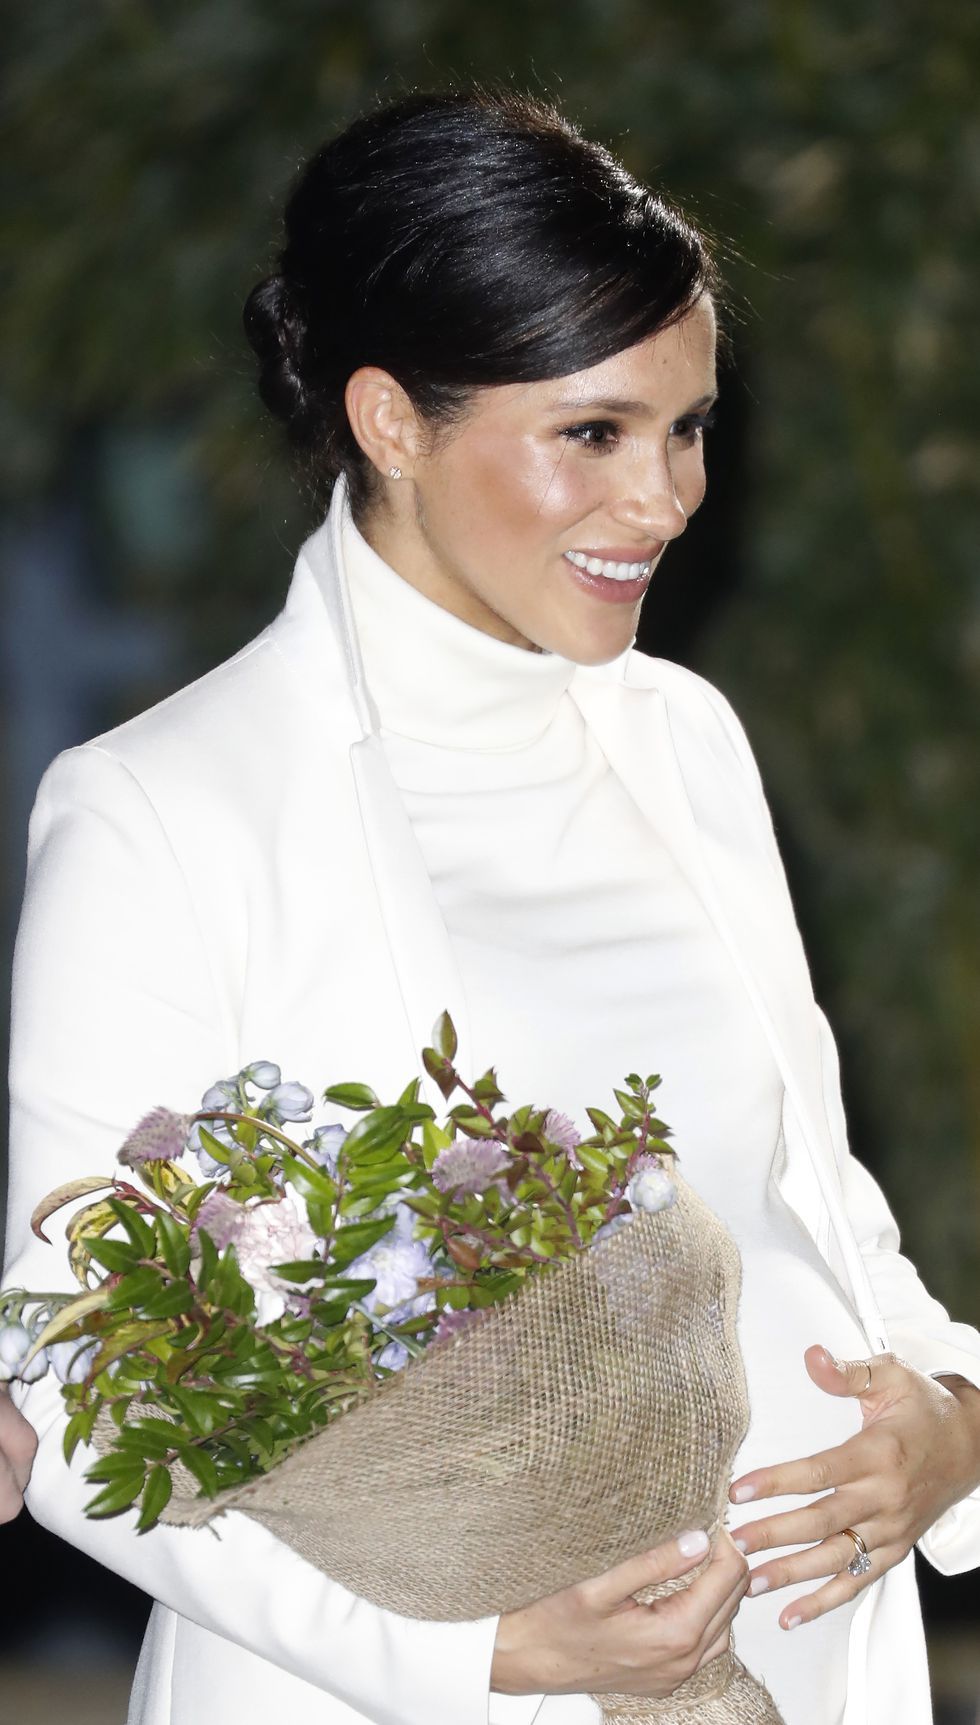 meghan-duchess-of-sussex-attends-a-gala-performance-of-the-news-photo-1129191244-1549998852.jpg